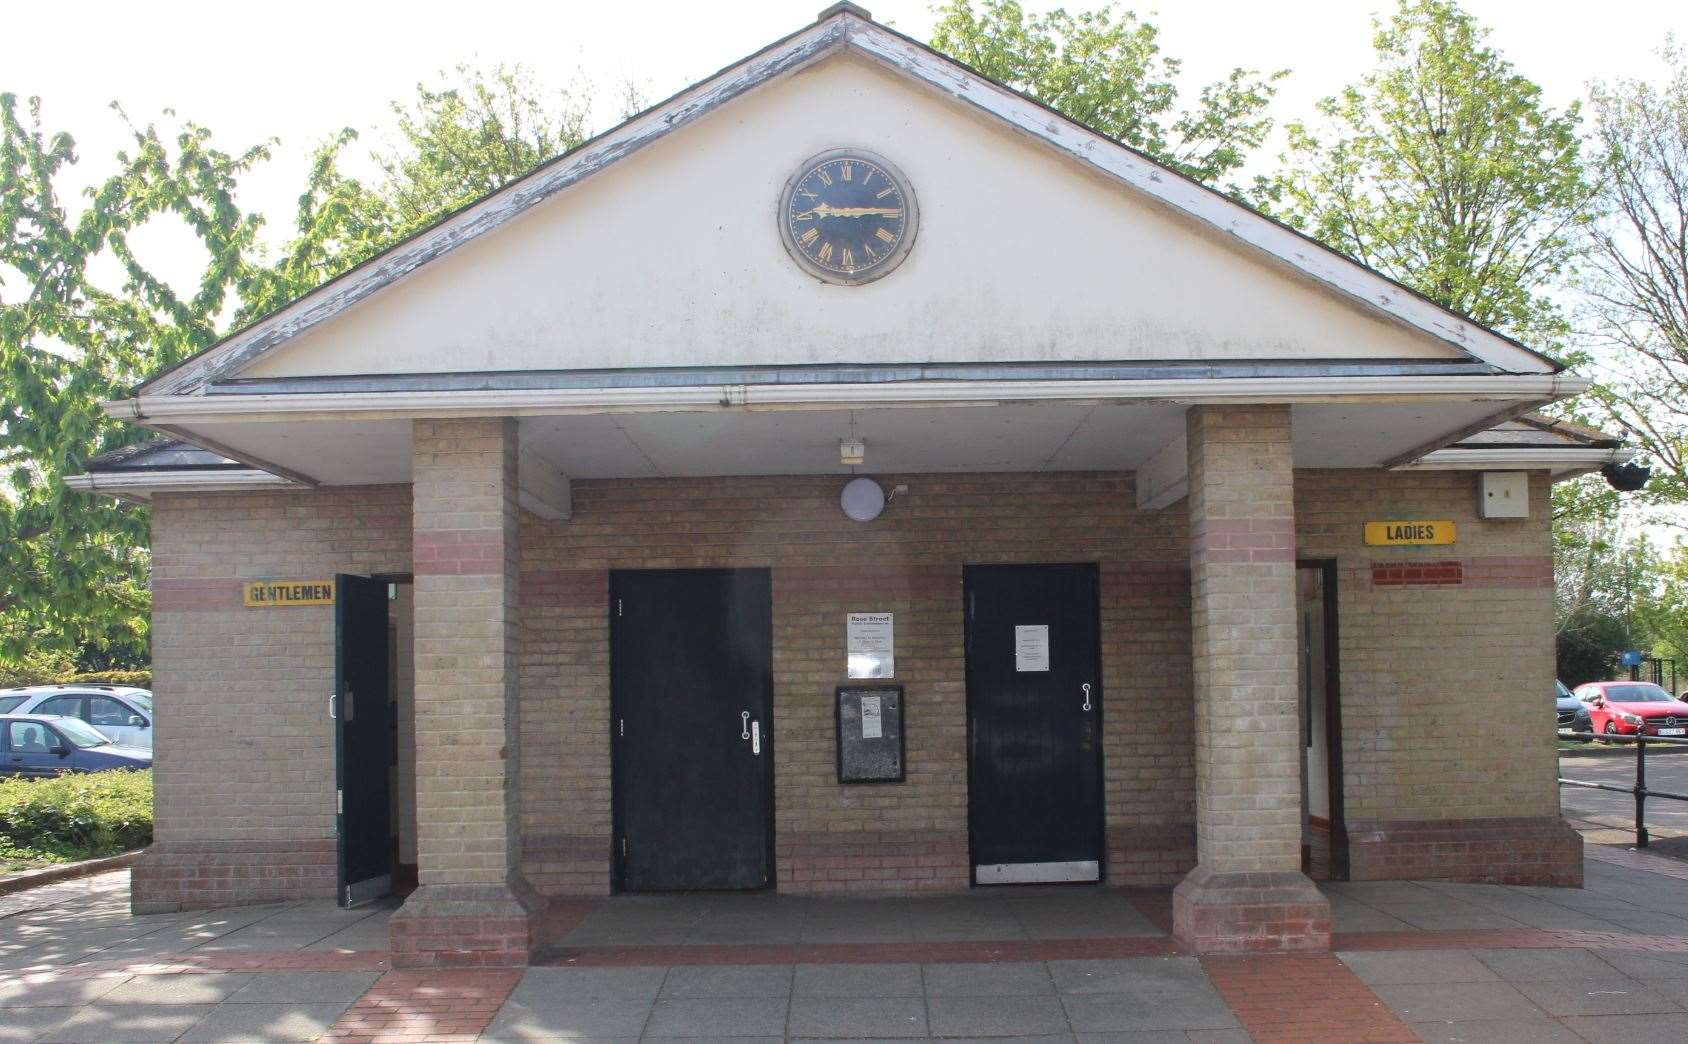 The couple were sleeping in the Rose Street public toilets until being kicked out by the council